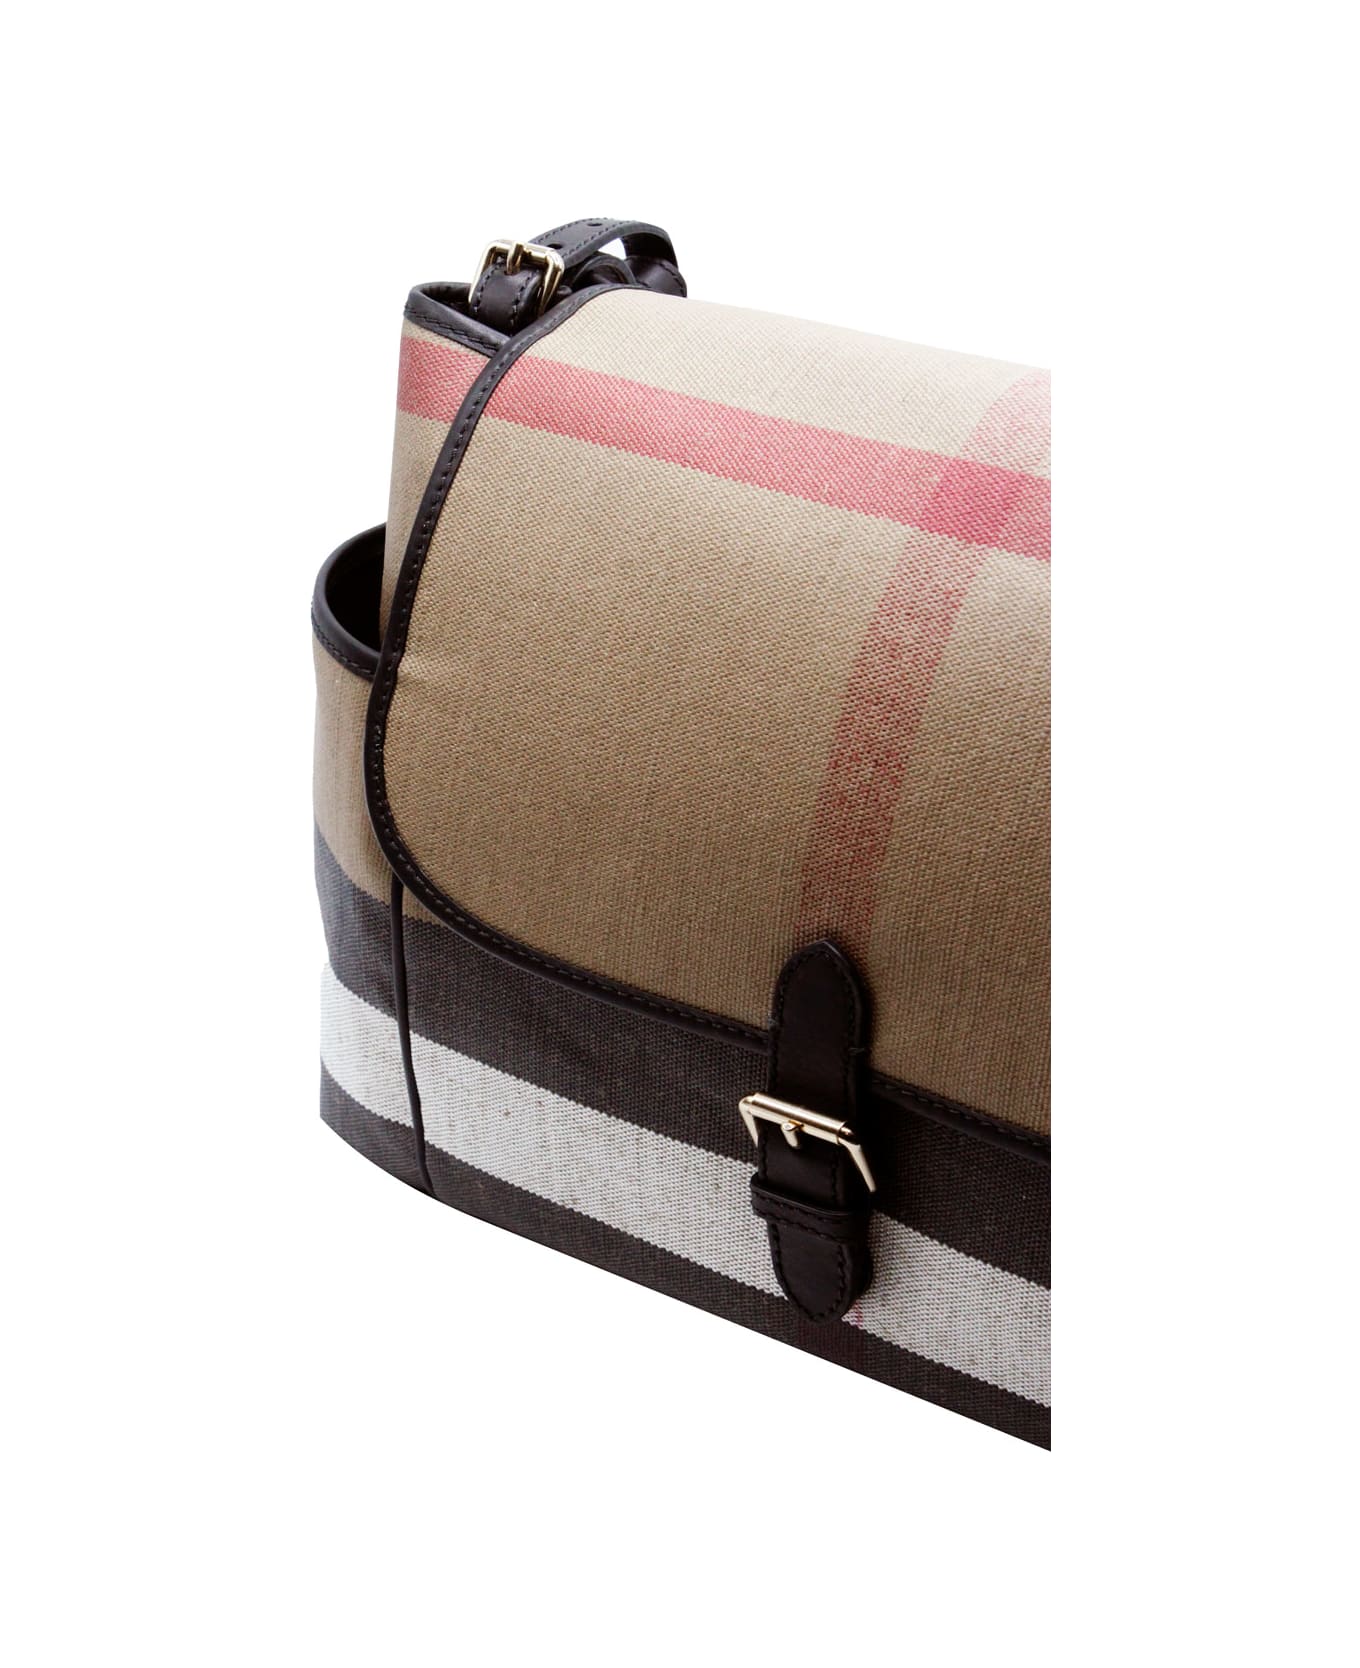 Burberry Mum Changing Bag Made Of Cotton Canvas With Check Pattern With Shoulder Strap, Comfortable Internal Pockets And Changing Mat. Measures Cm. 38x30x17 - Check アクセサリー＆ギフト